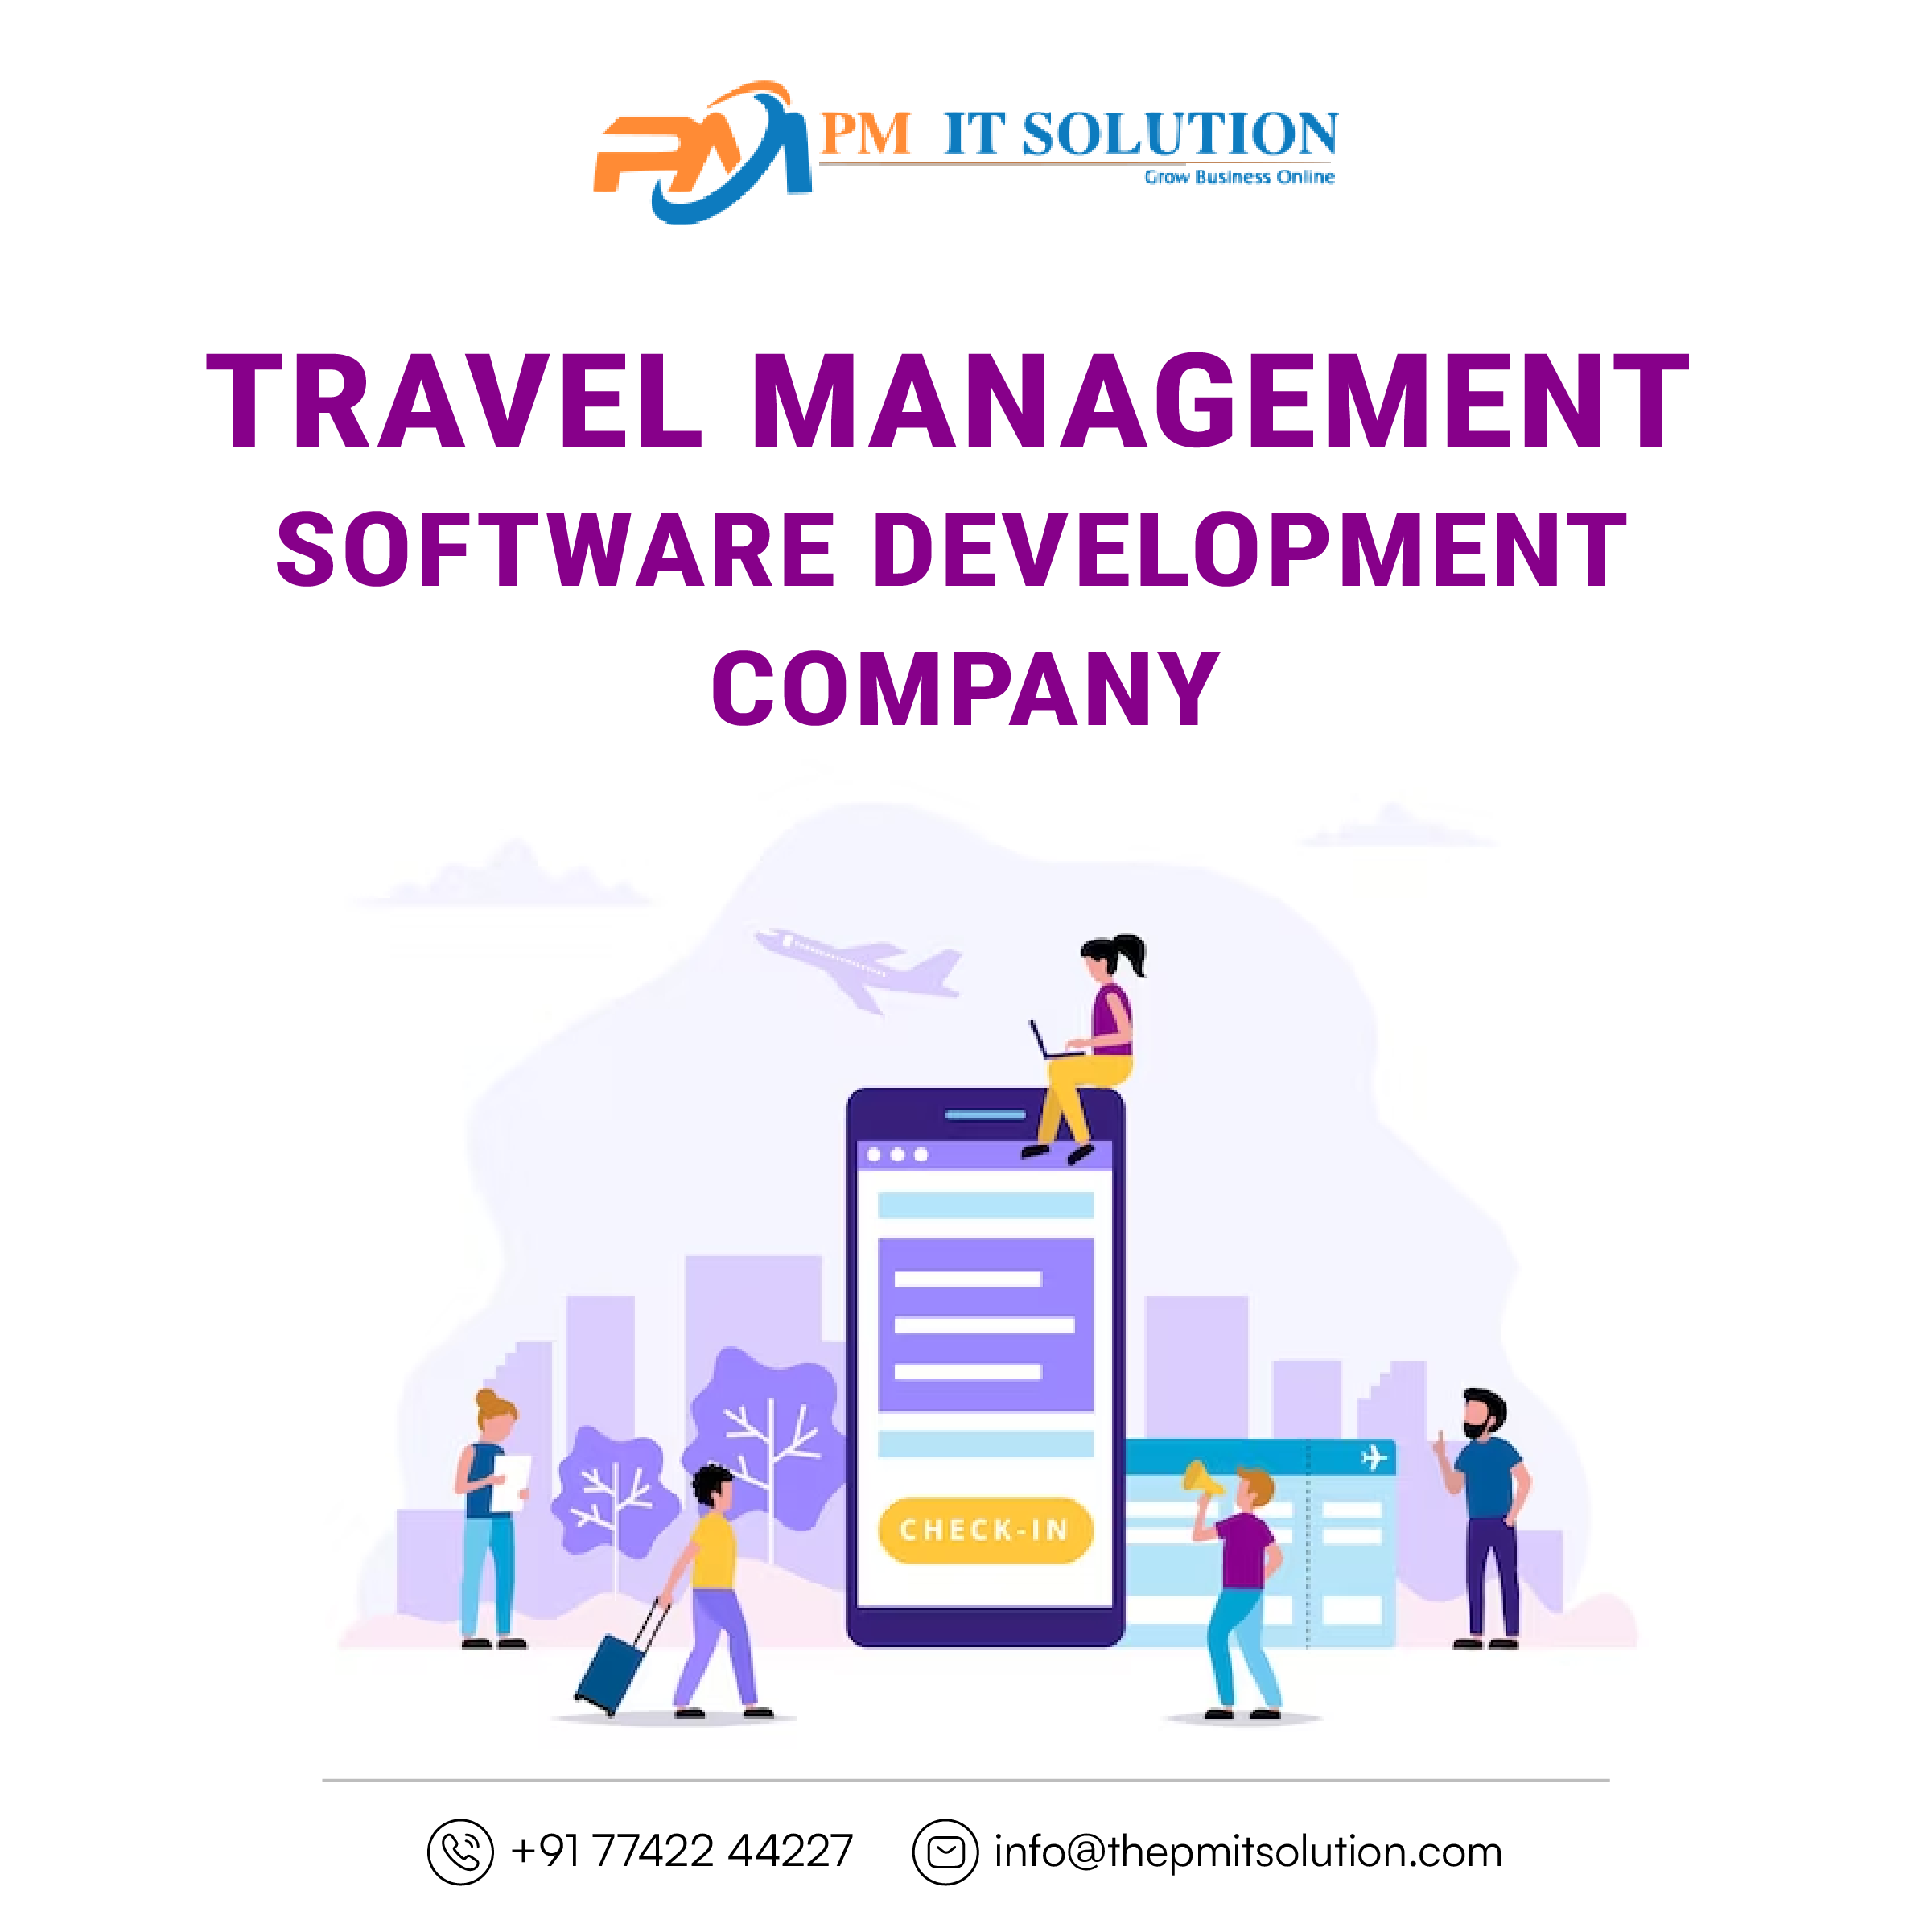 Revolutionizing Travel with PM IT Solution: A Leading Travel Management Software Development Company